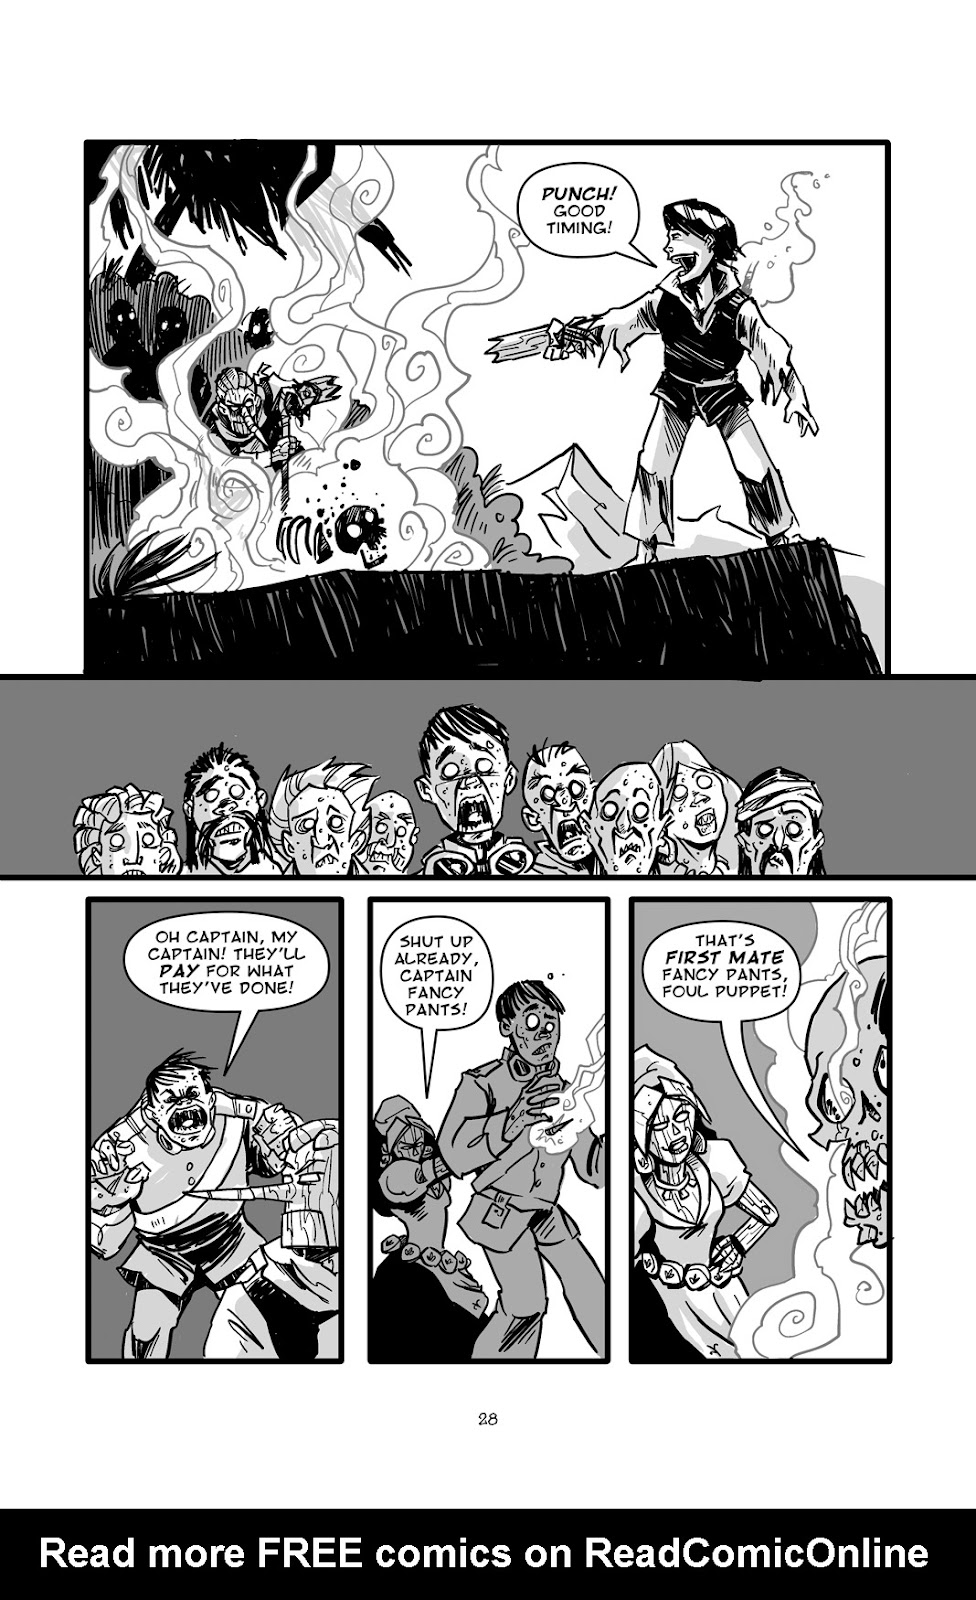 Pinocchio: Vampire Slayer - Of Wood and Blood issue 2 - Page 3